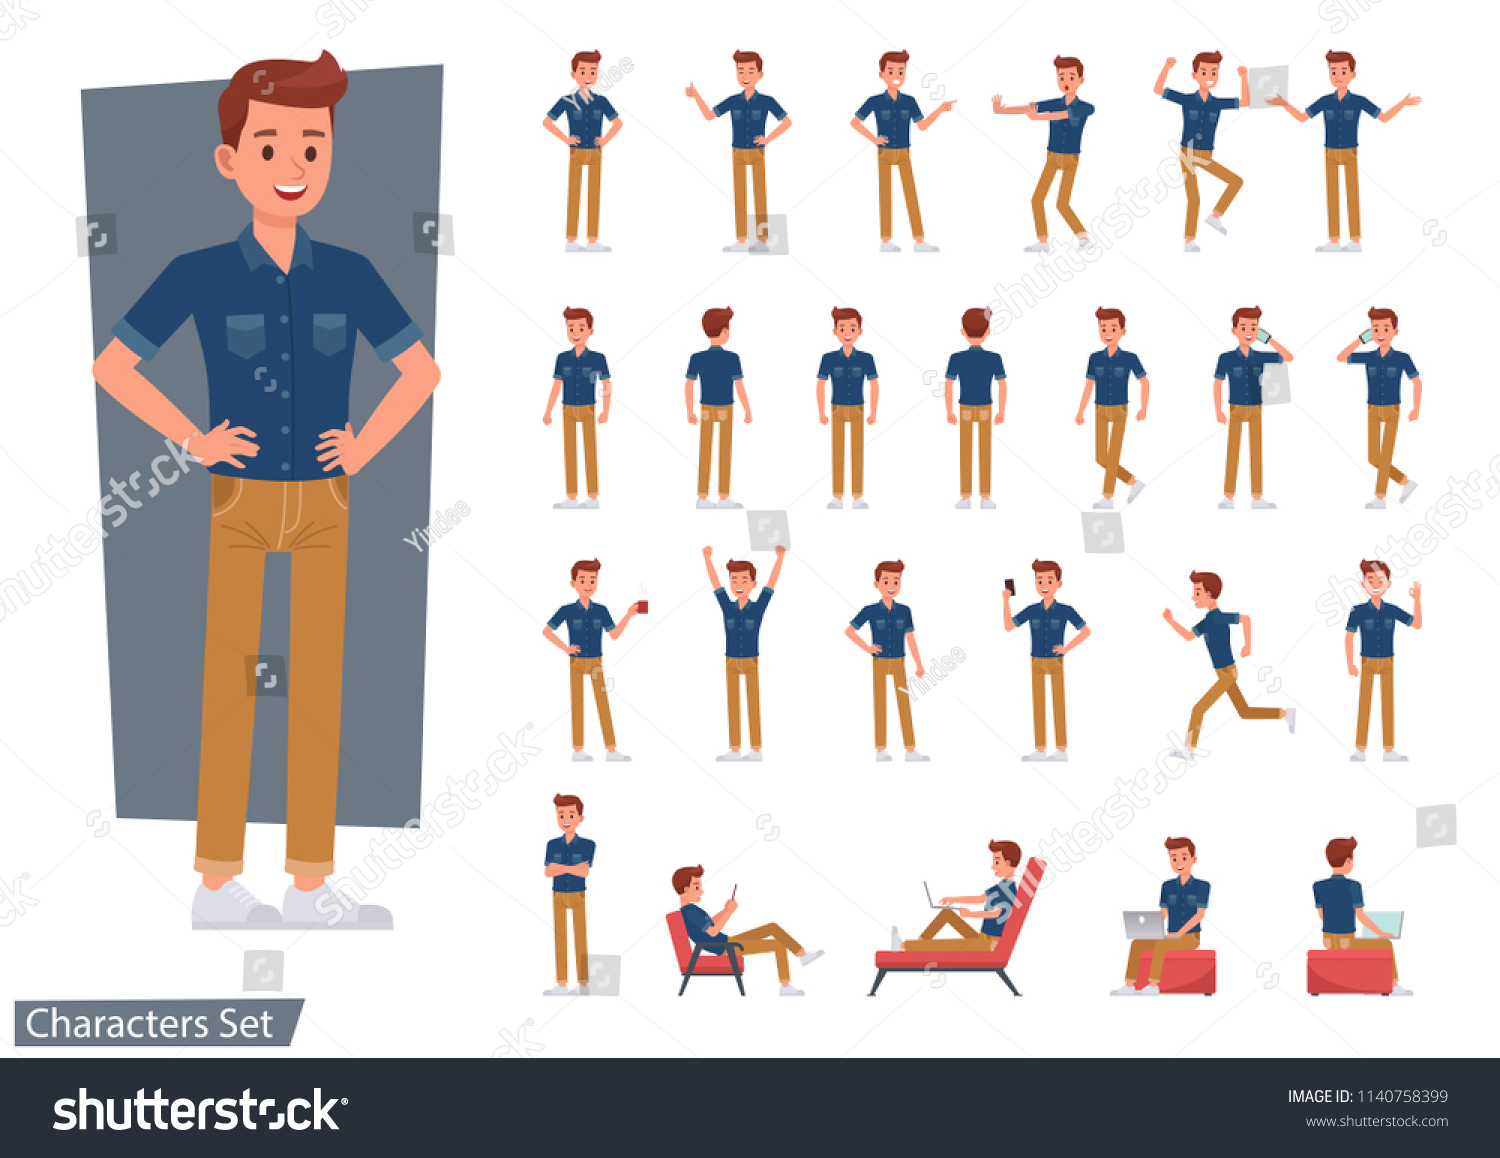 Set of man wear blue jeans shirt character vector design. Presentation in various action with emotions, running, standing and walking. #1140758399